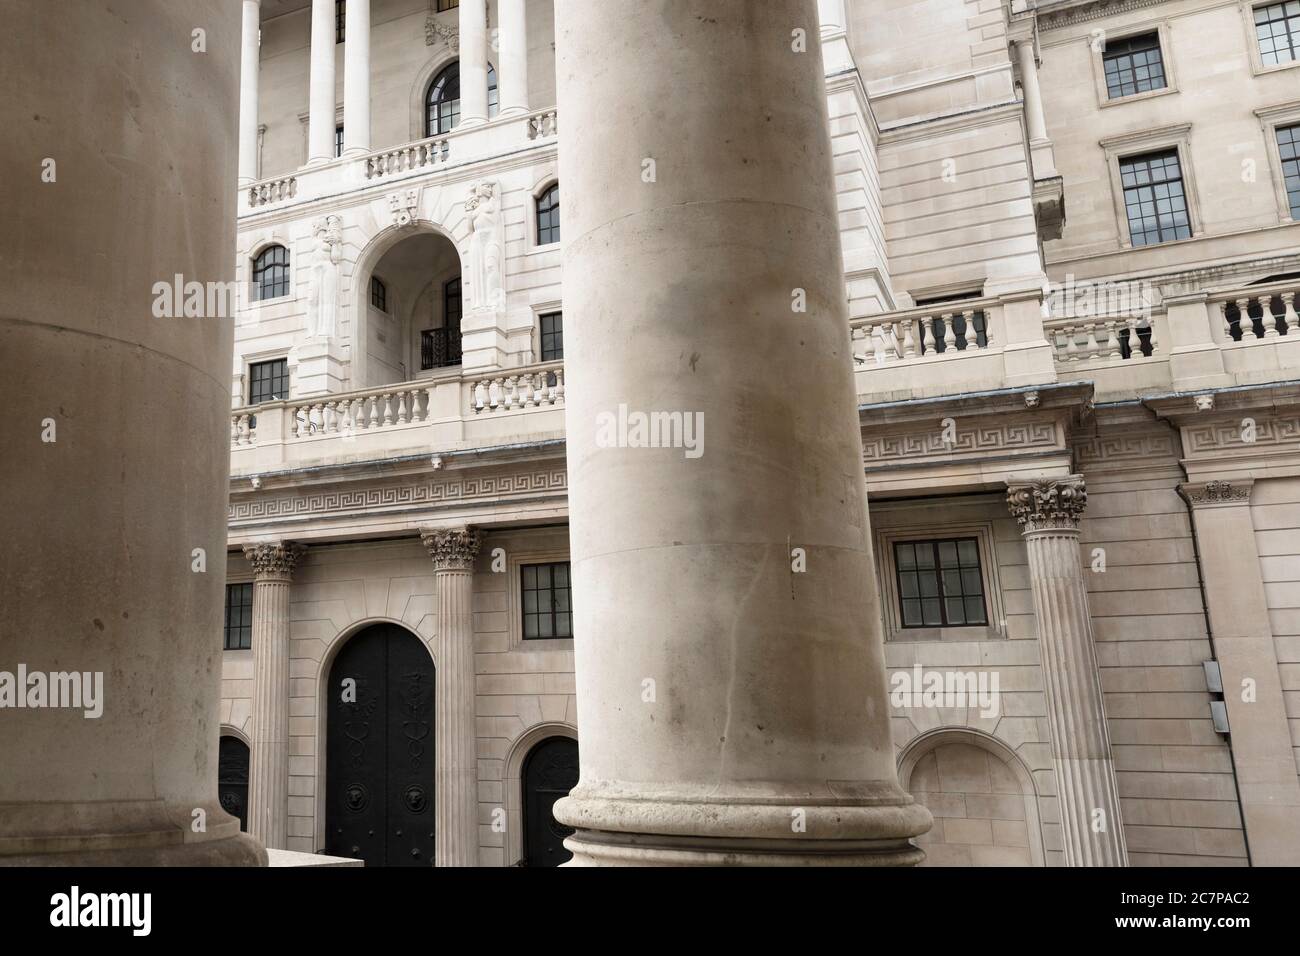 Bank of England is the central bank of the United Kingdom. Sometimes known as the ‘Old Lady’ of Threadneedle Street'. Threadneedle Street, London, UK  18 Mar 2017 Stock Photo